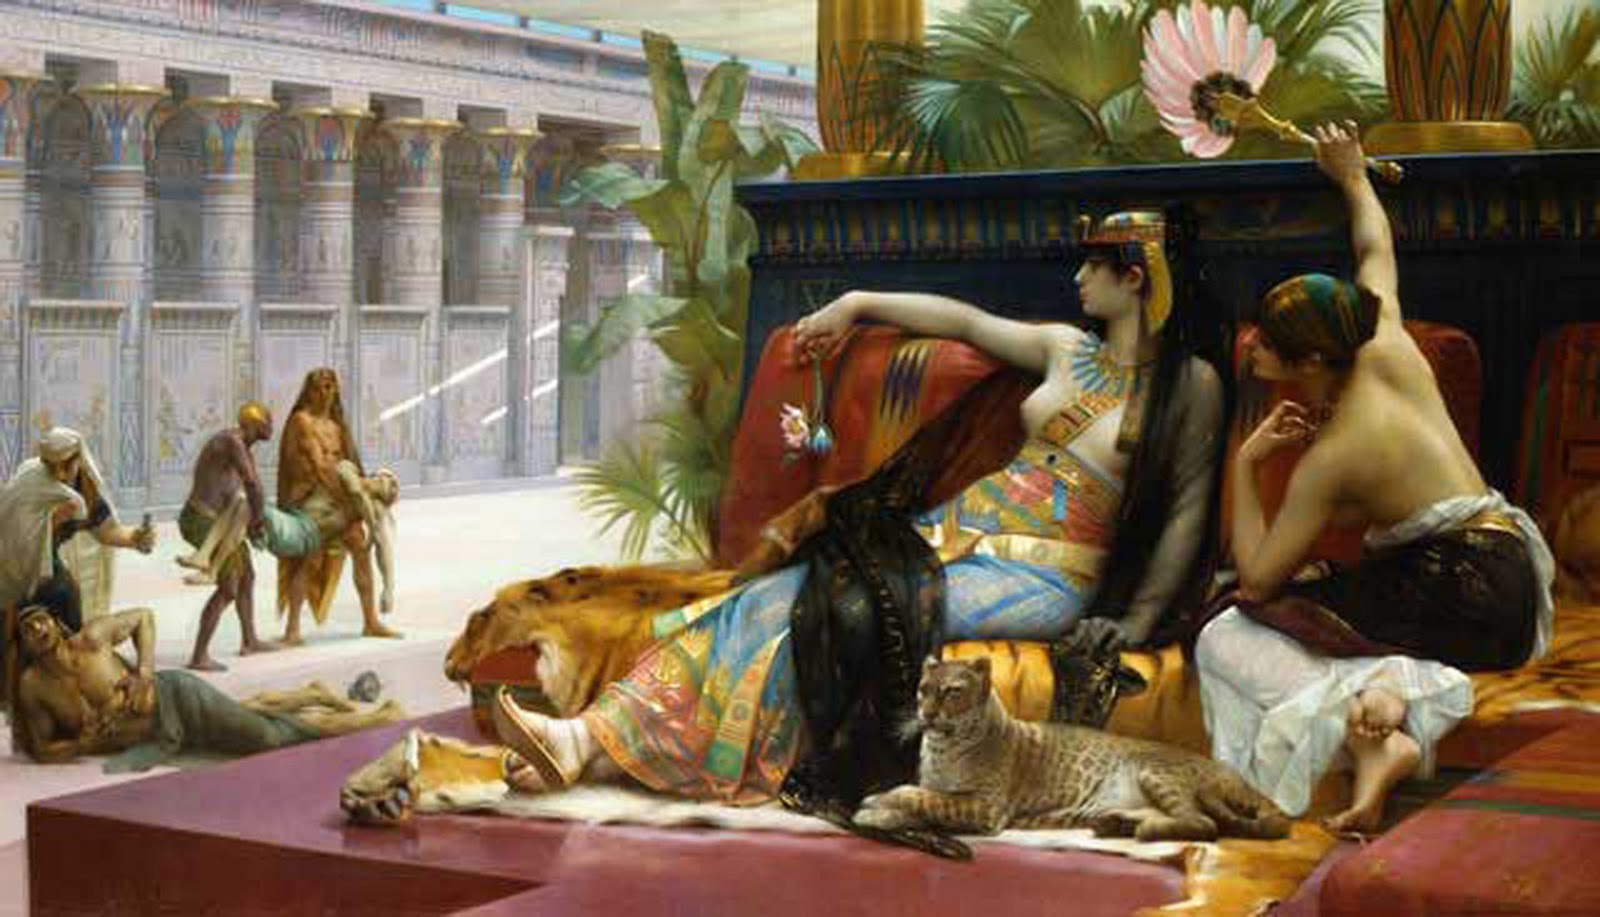 Cabanel, Cleopatra Testing Poison on Condemned Prison